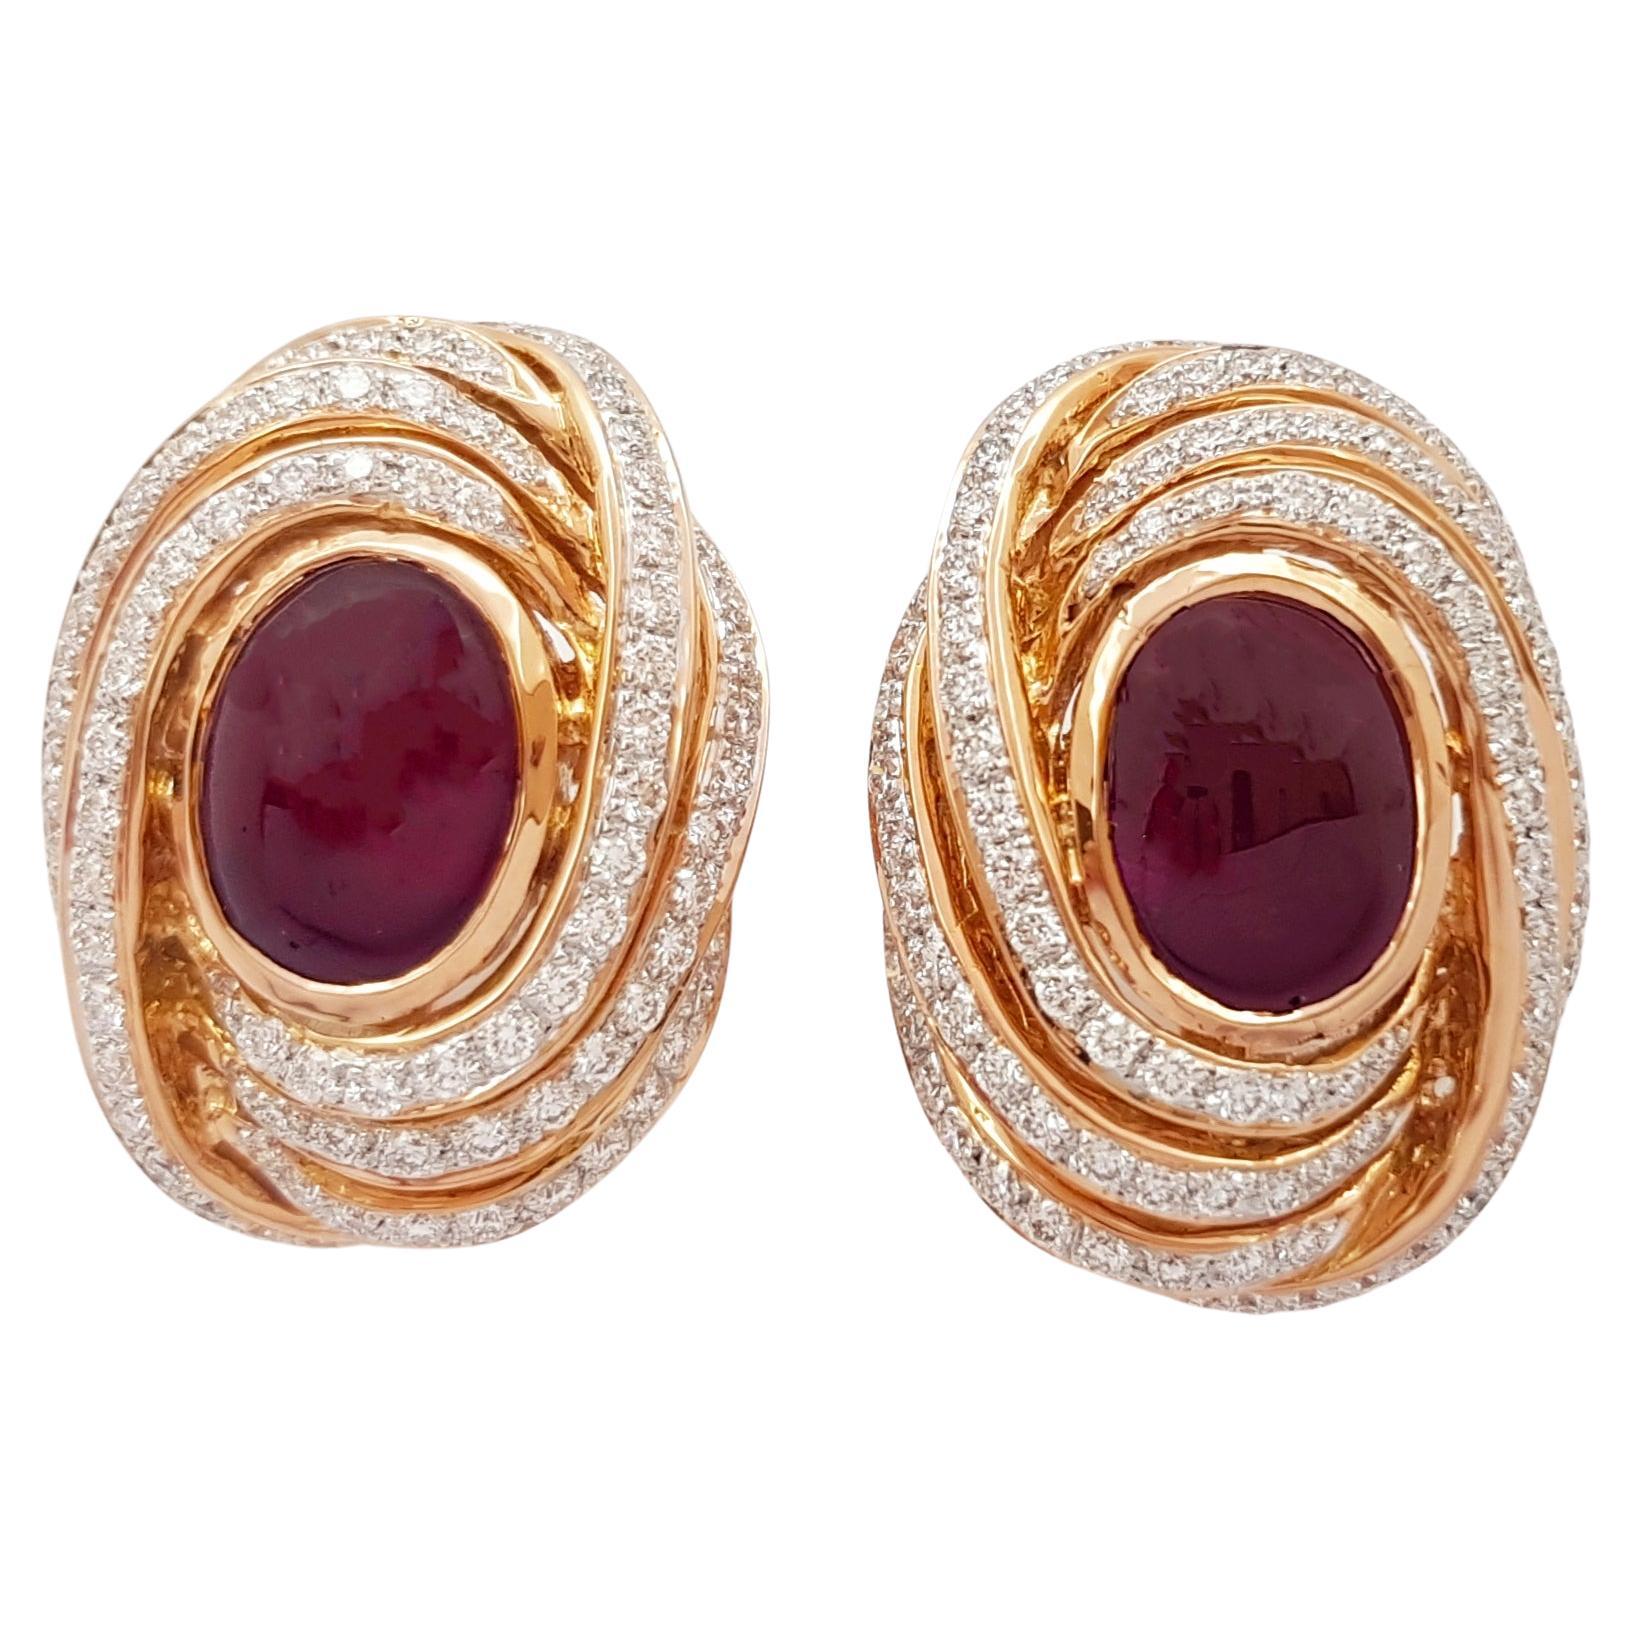 Cabochon Ruby with Diamond Earrings set in 18K Rose Gold Settings